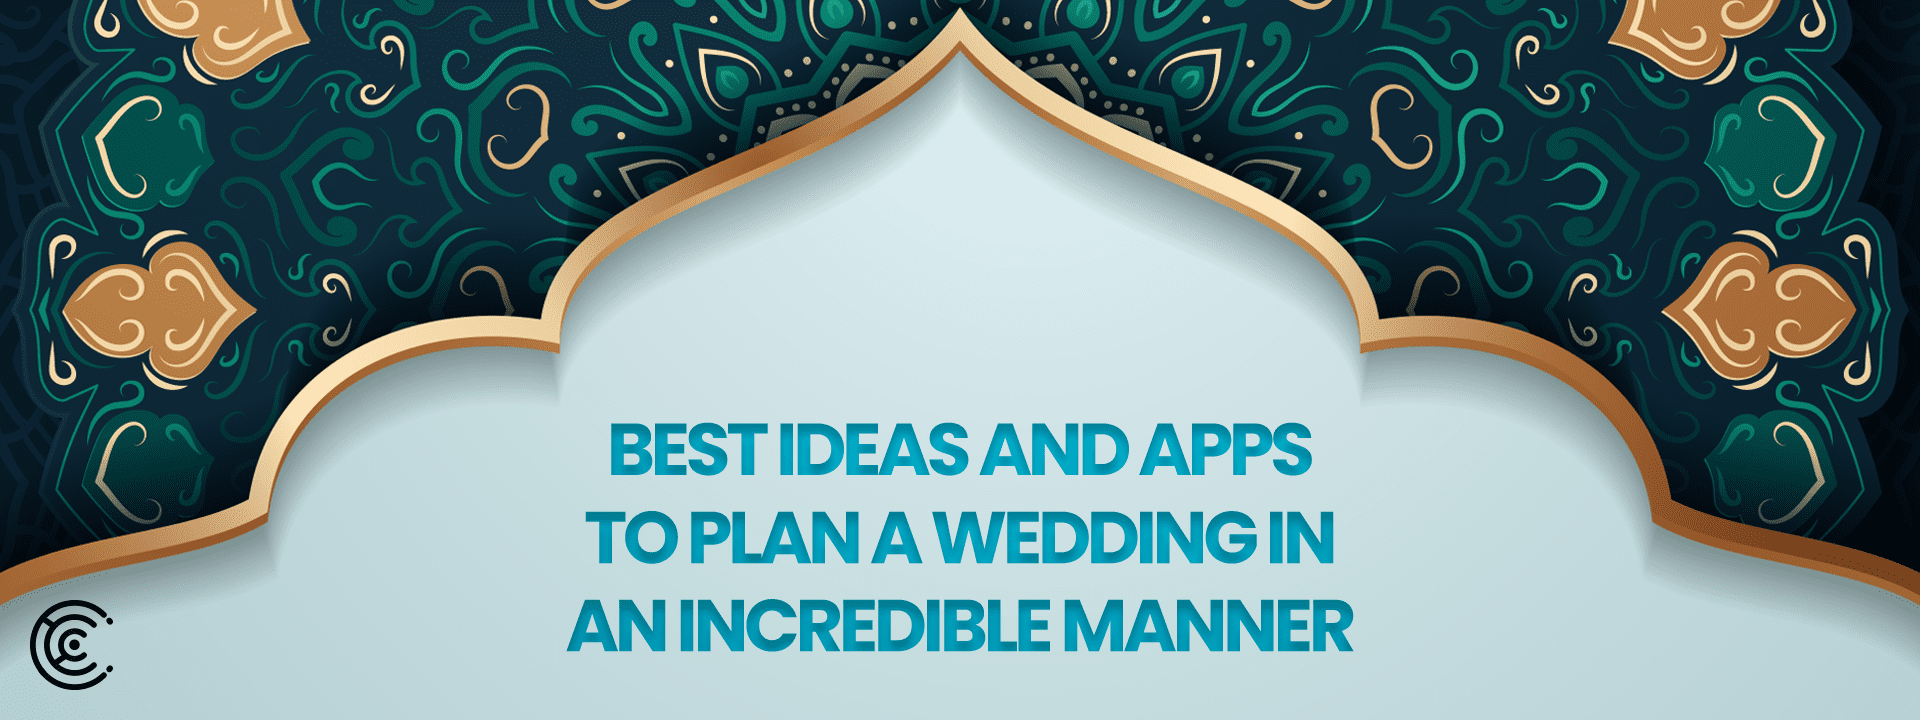 ideas and apps to plan a wedding in an incredible manner